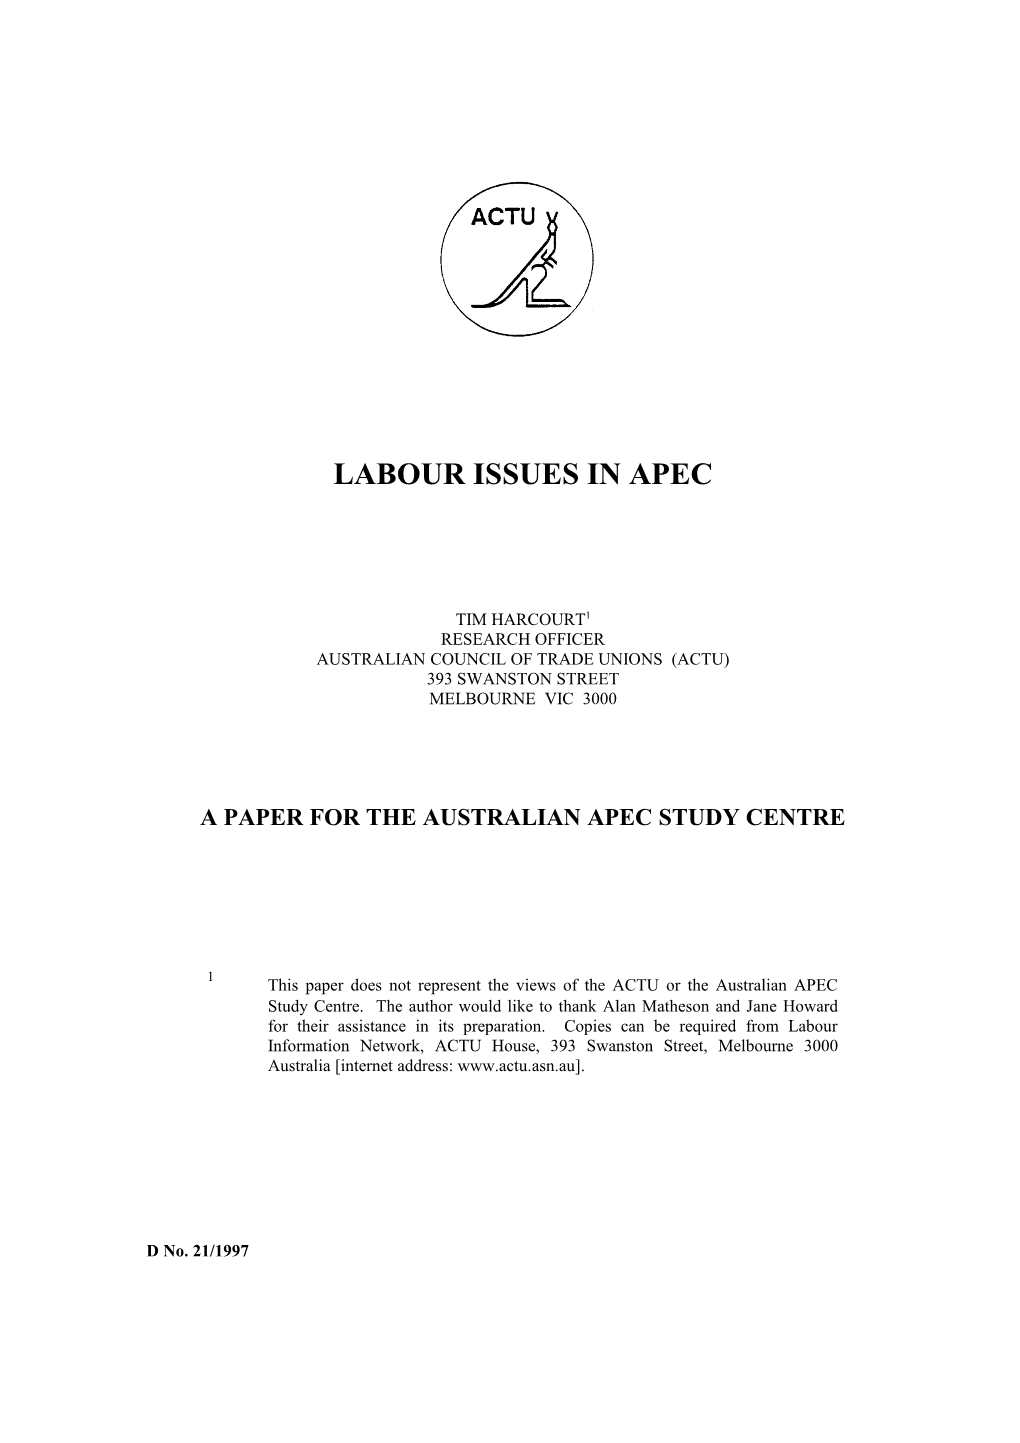 Labour Issues in APEC